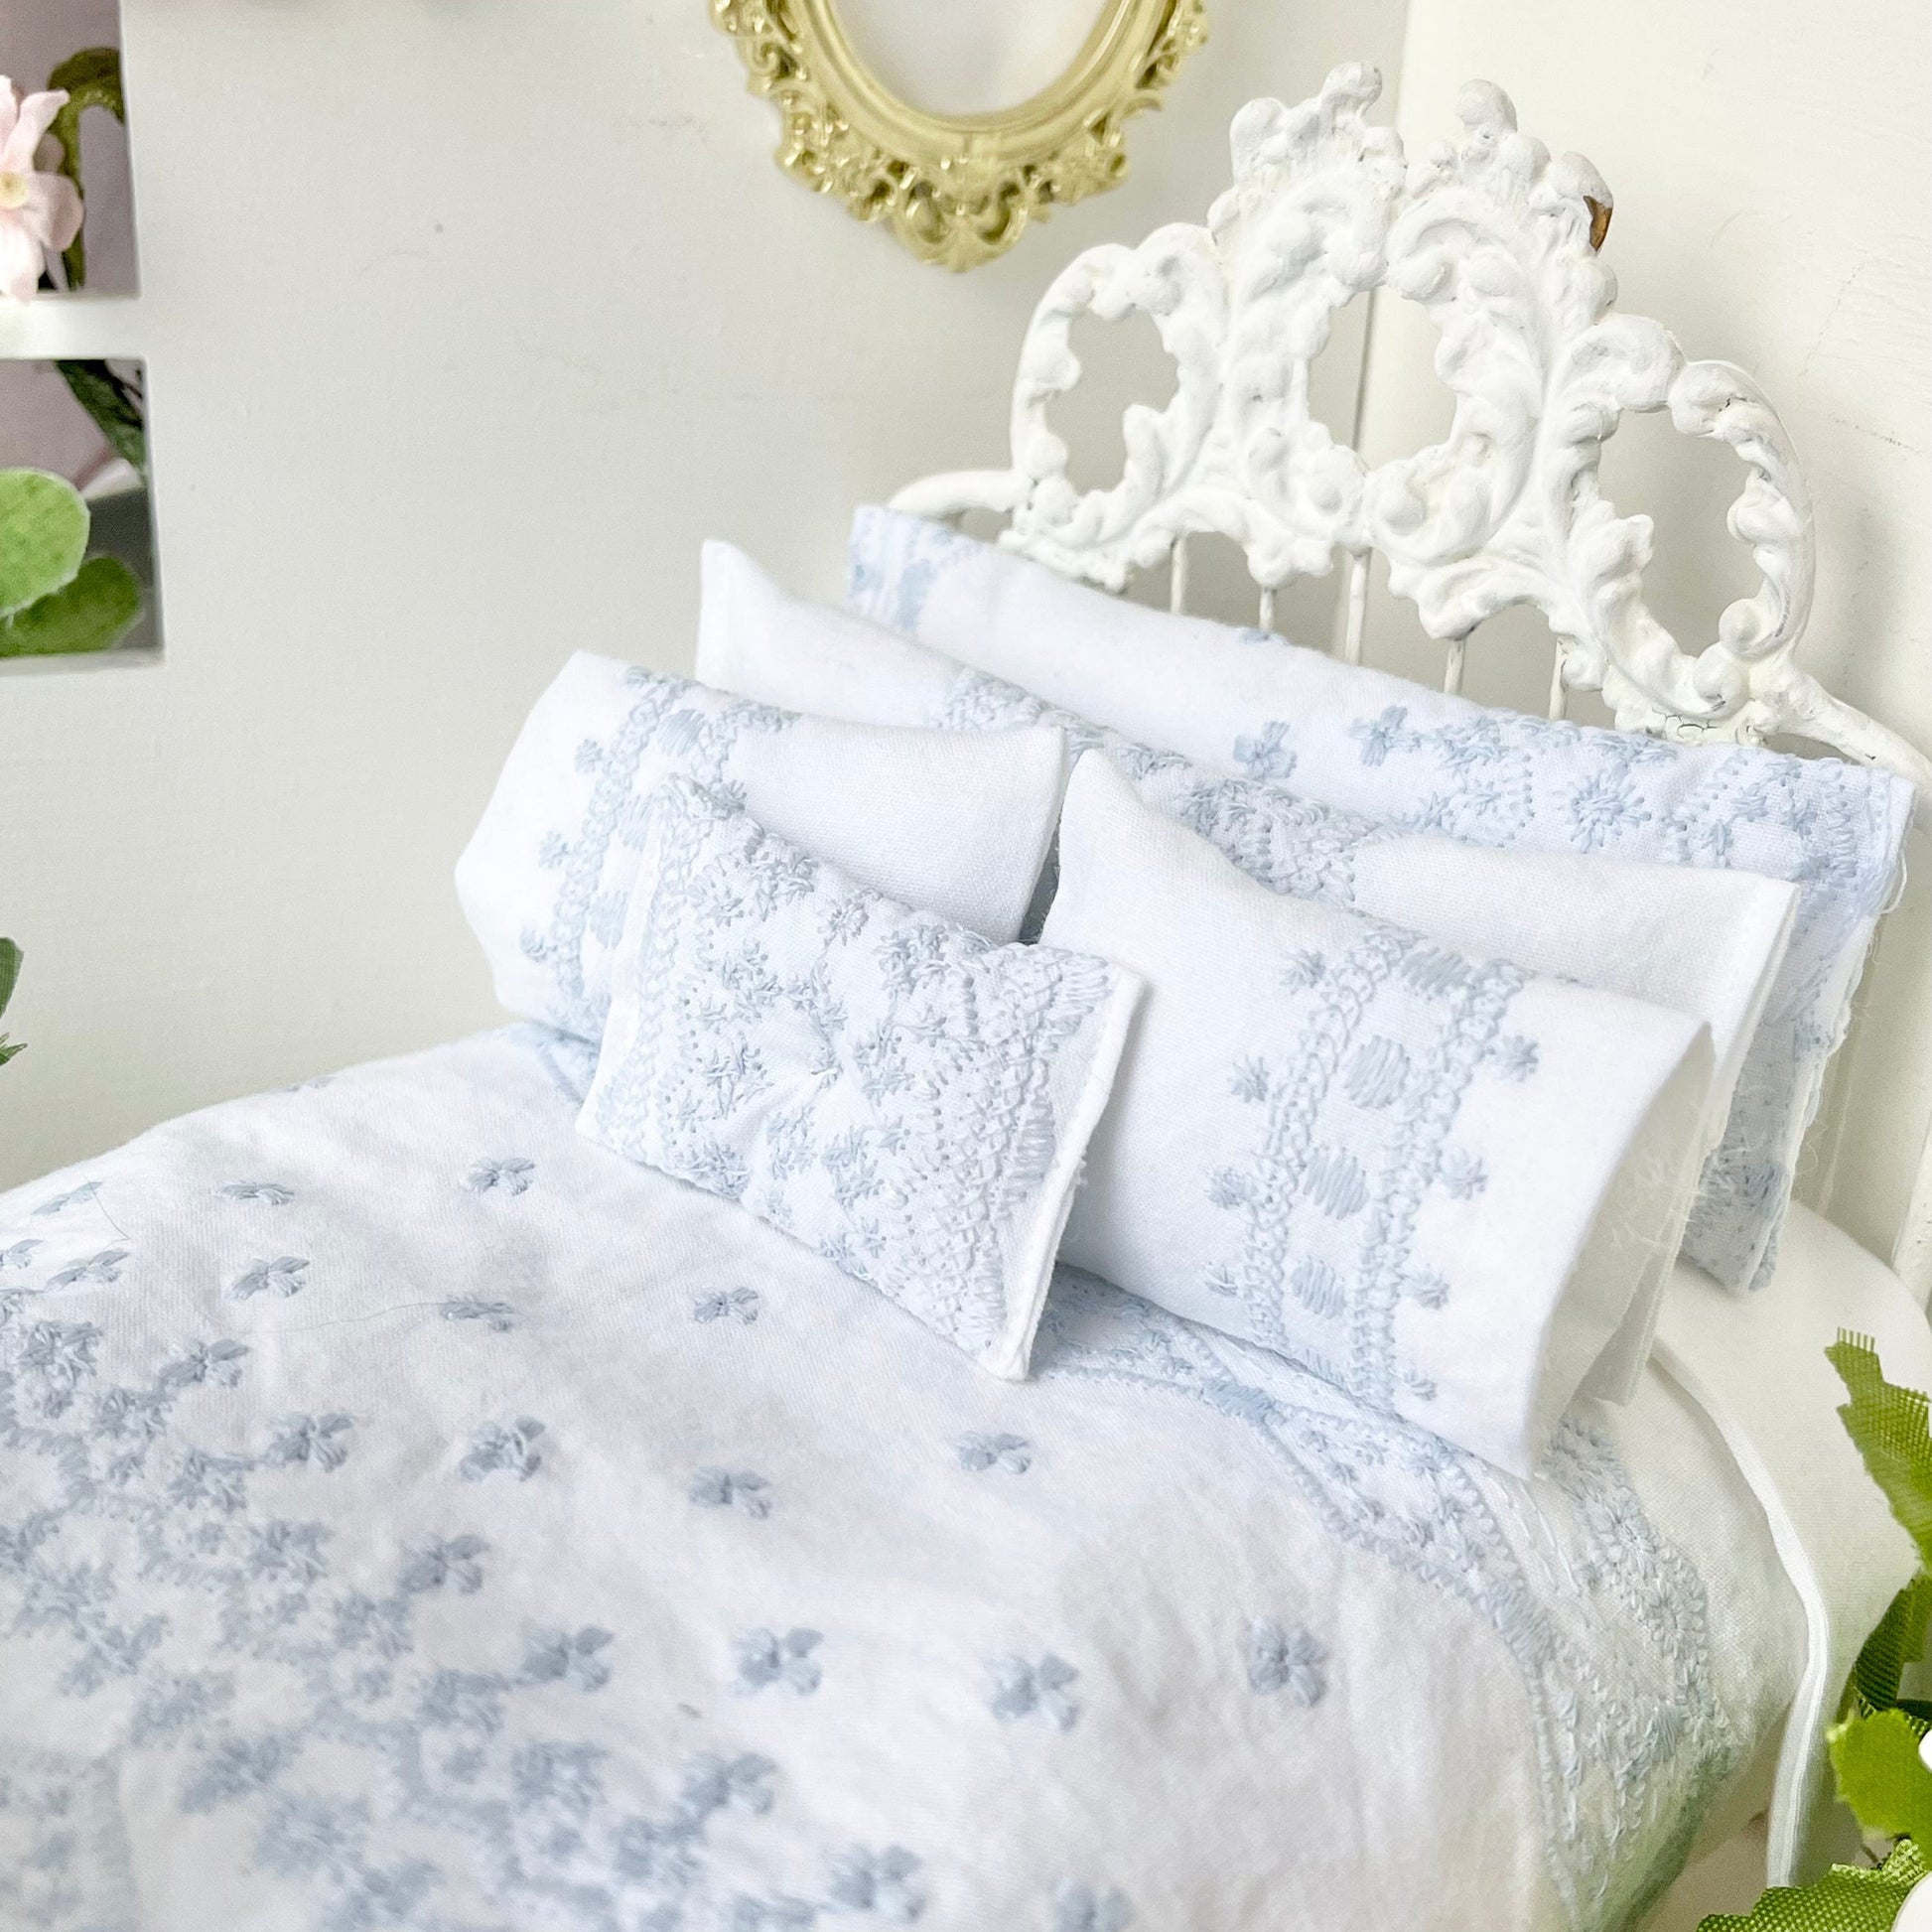 Chantallena Shabby Bed Linens Double Bedding Set Shabby Cottage- Six Piece Shabby Pale Blue Embroidered Bedding Set